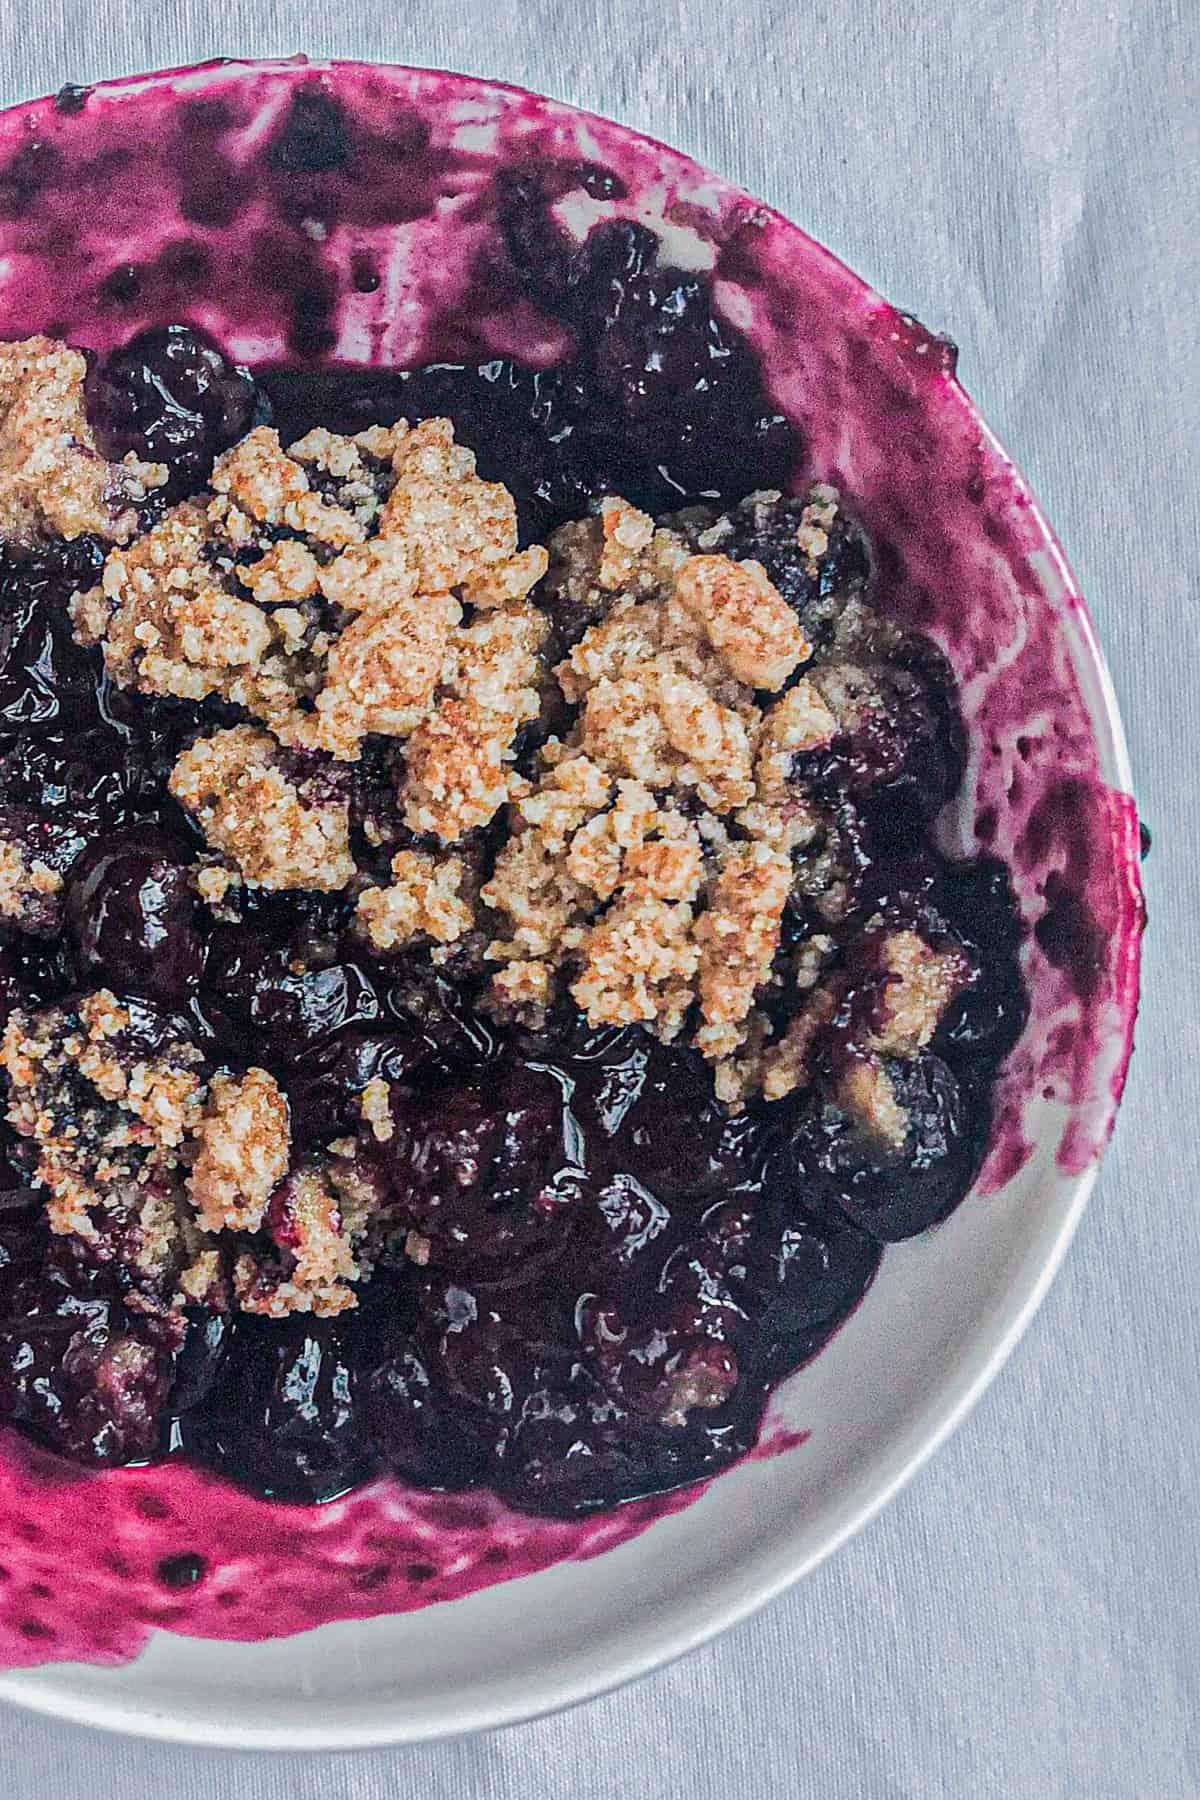 Blueberry ginger crisp is a great dessert to go with spaghetti.